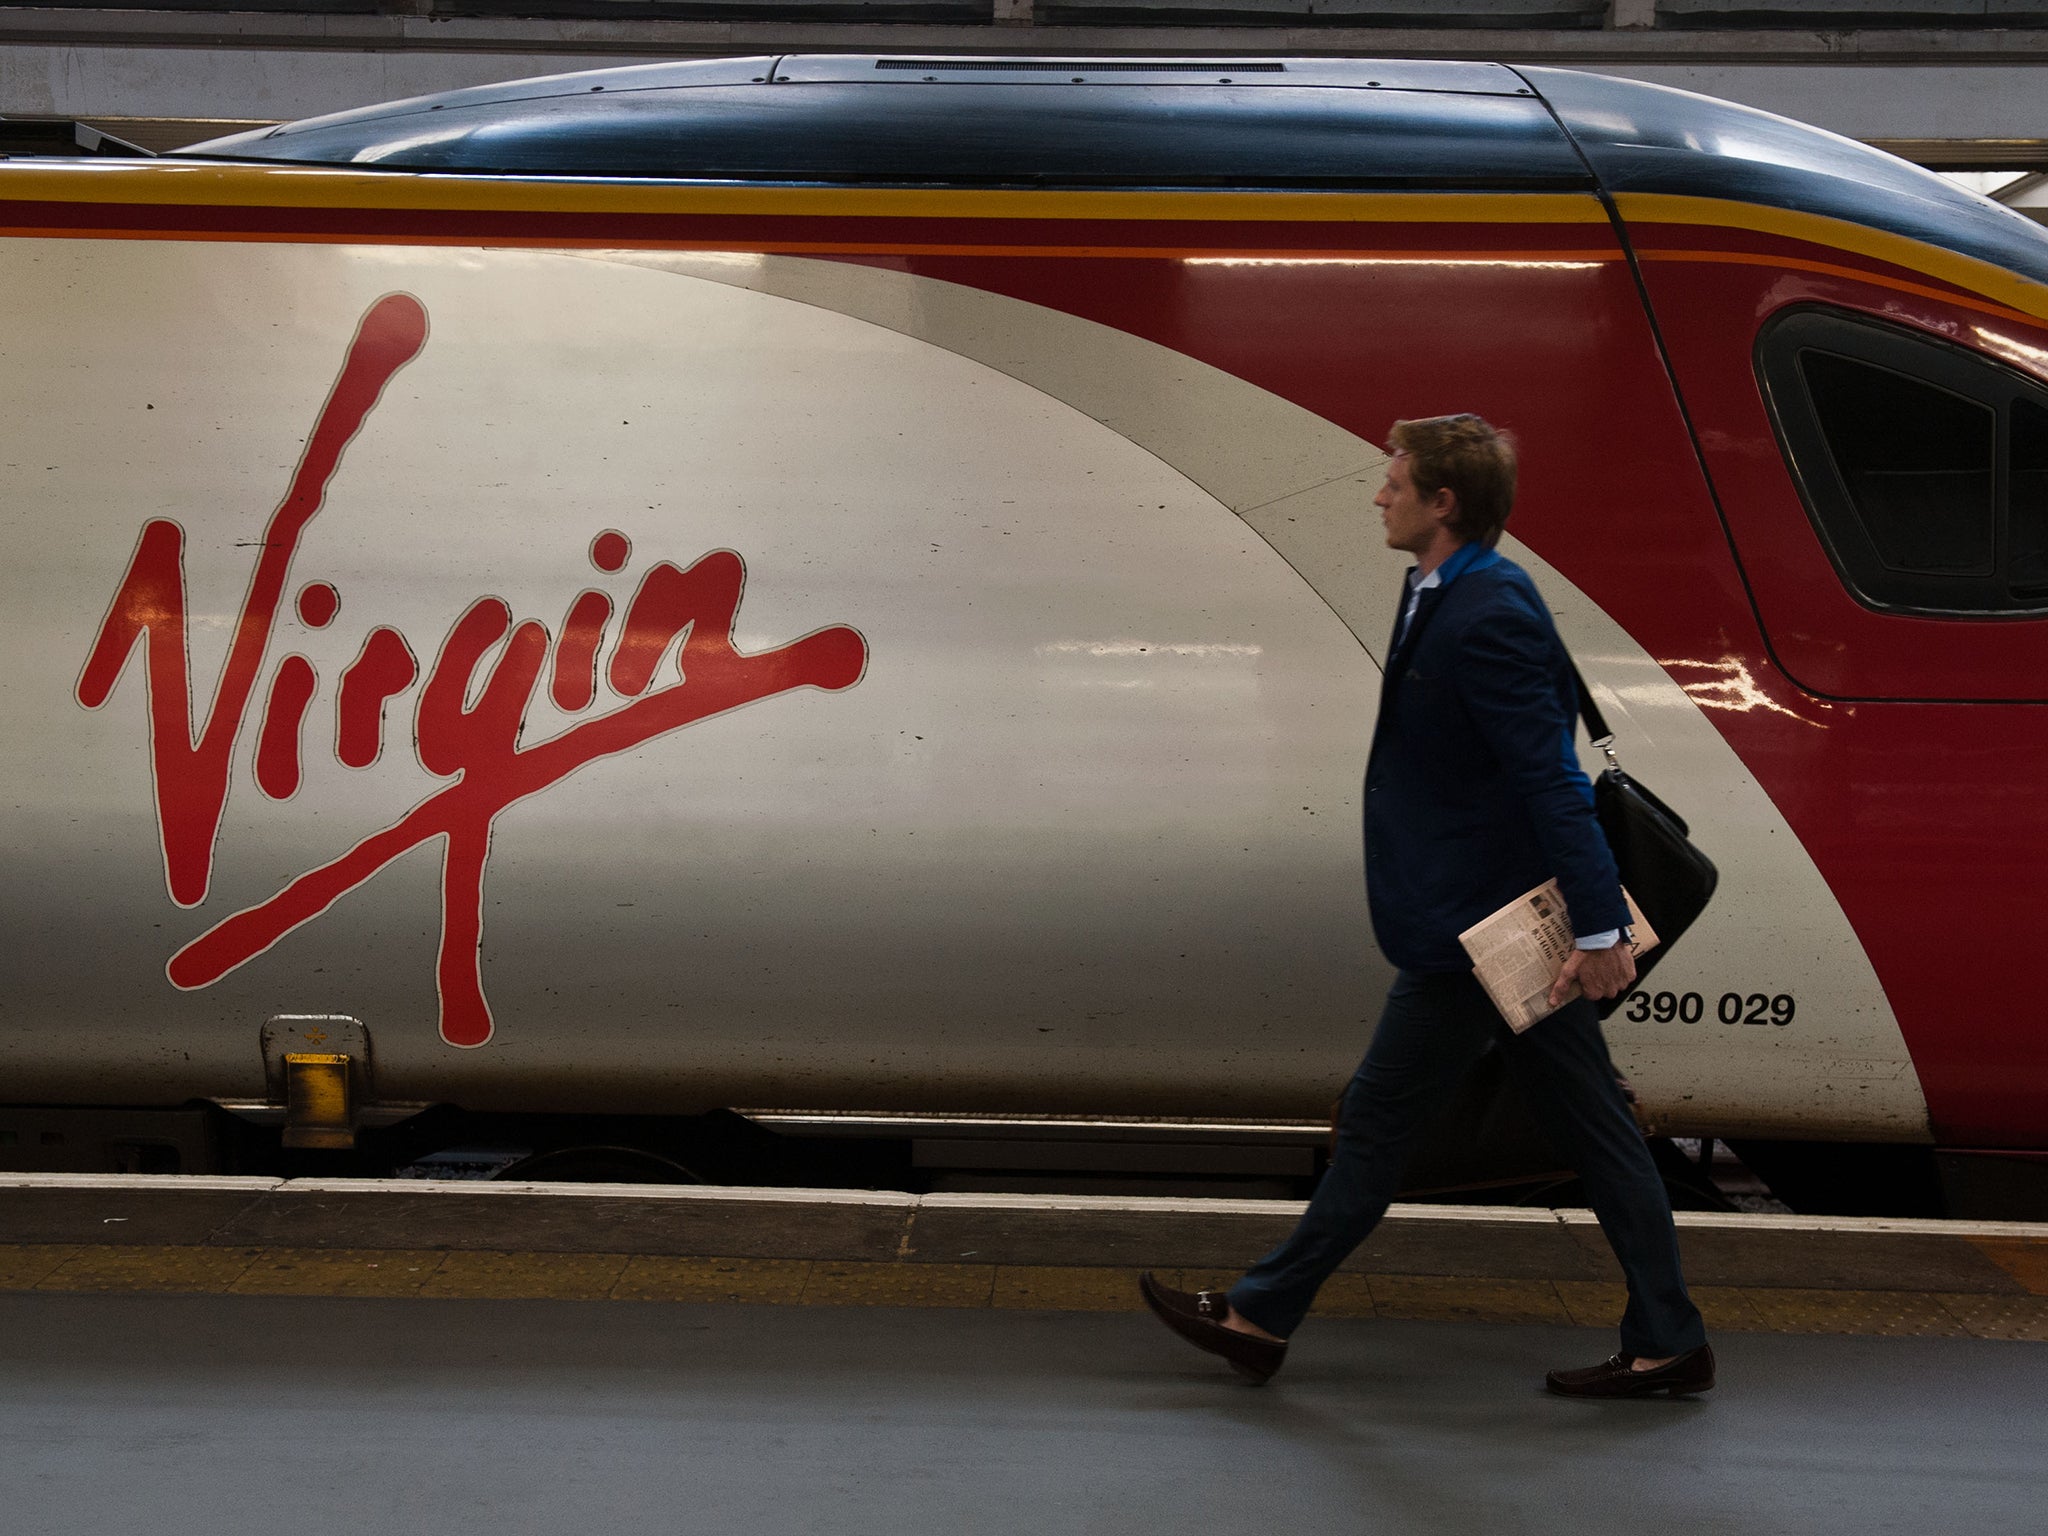 The average complaint rate for the rail industry is one passenger in 3,300, but between April and June this year, one in 500 passengers on Virgin Trains West Coast complained